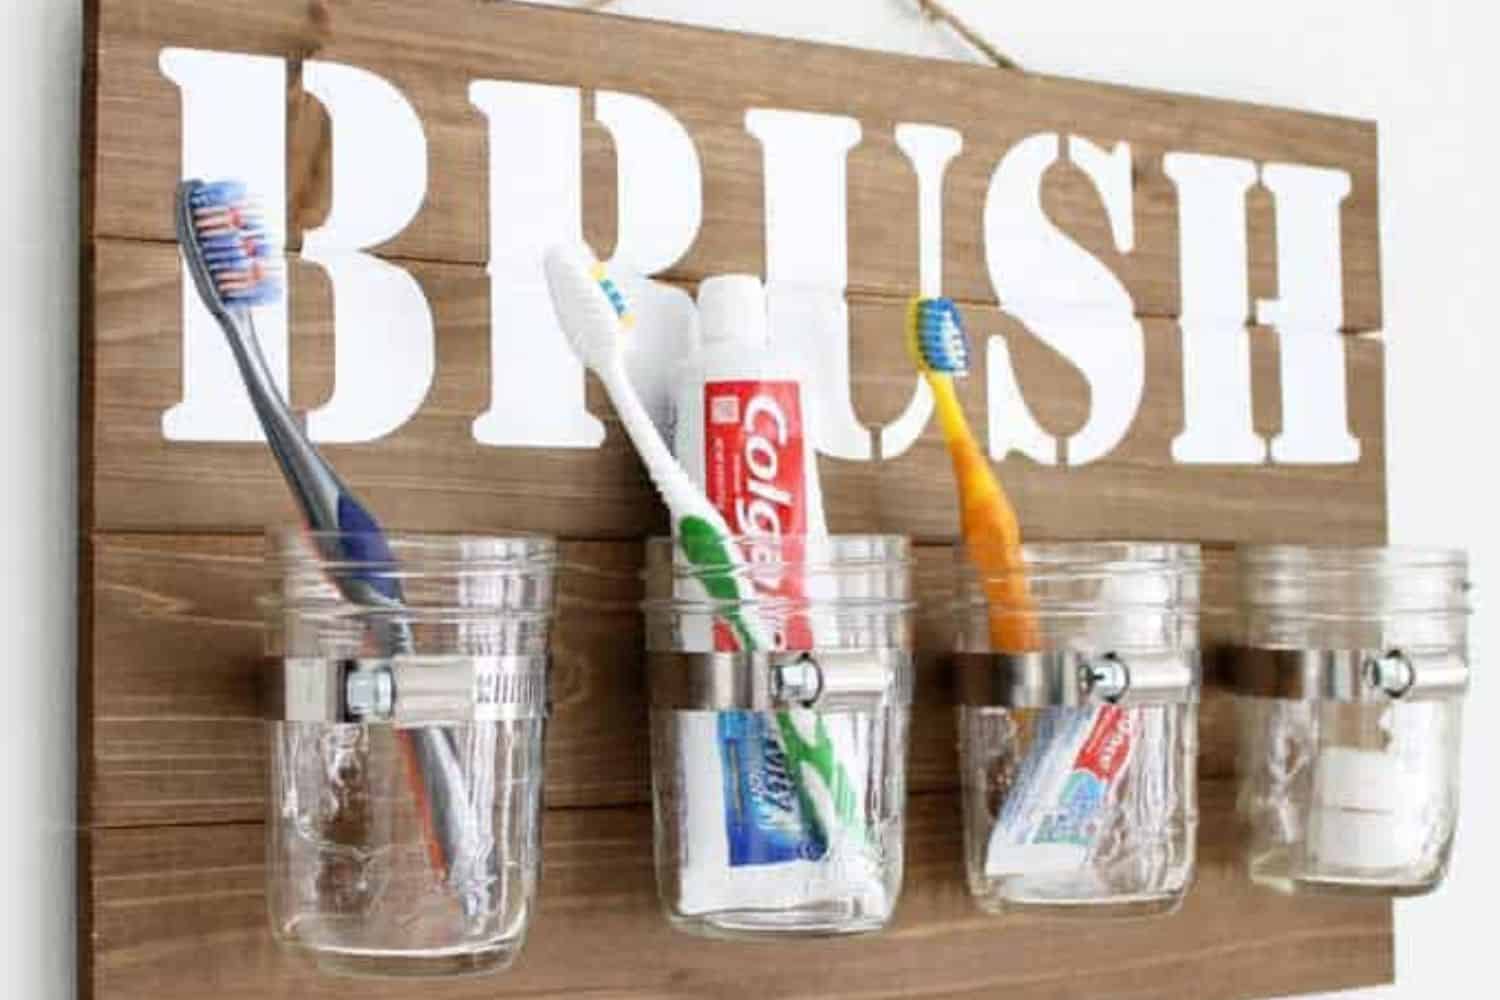 brush sign holding toothbrushes